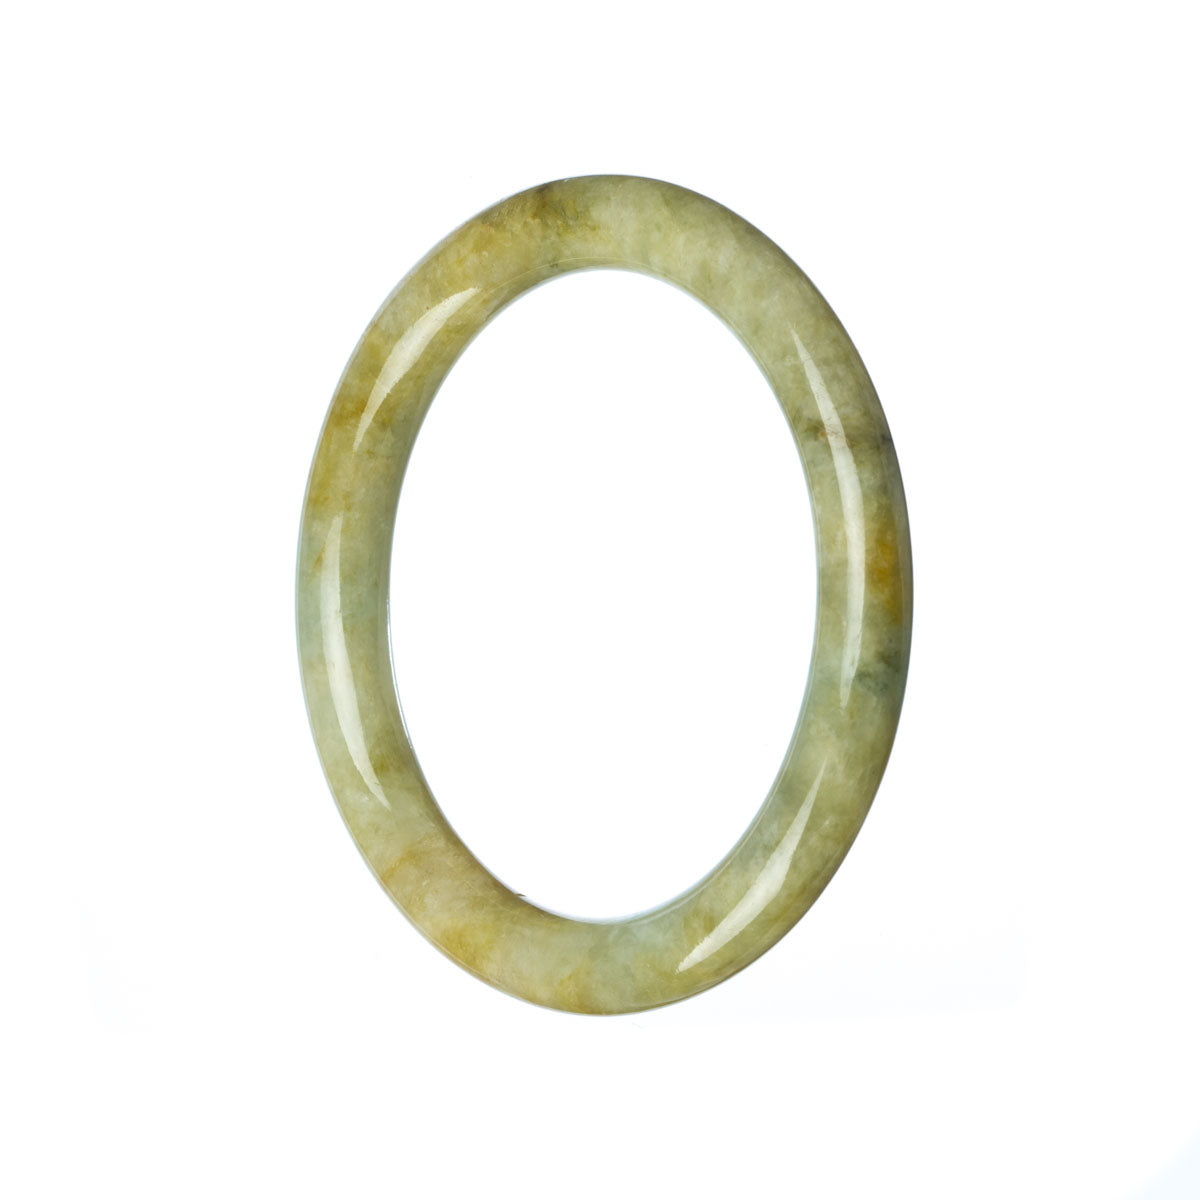 A small, exquisite jade bangle with a beautiful green-brown hue, perfect for adding a touch of elegance to any outfit.